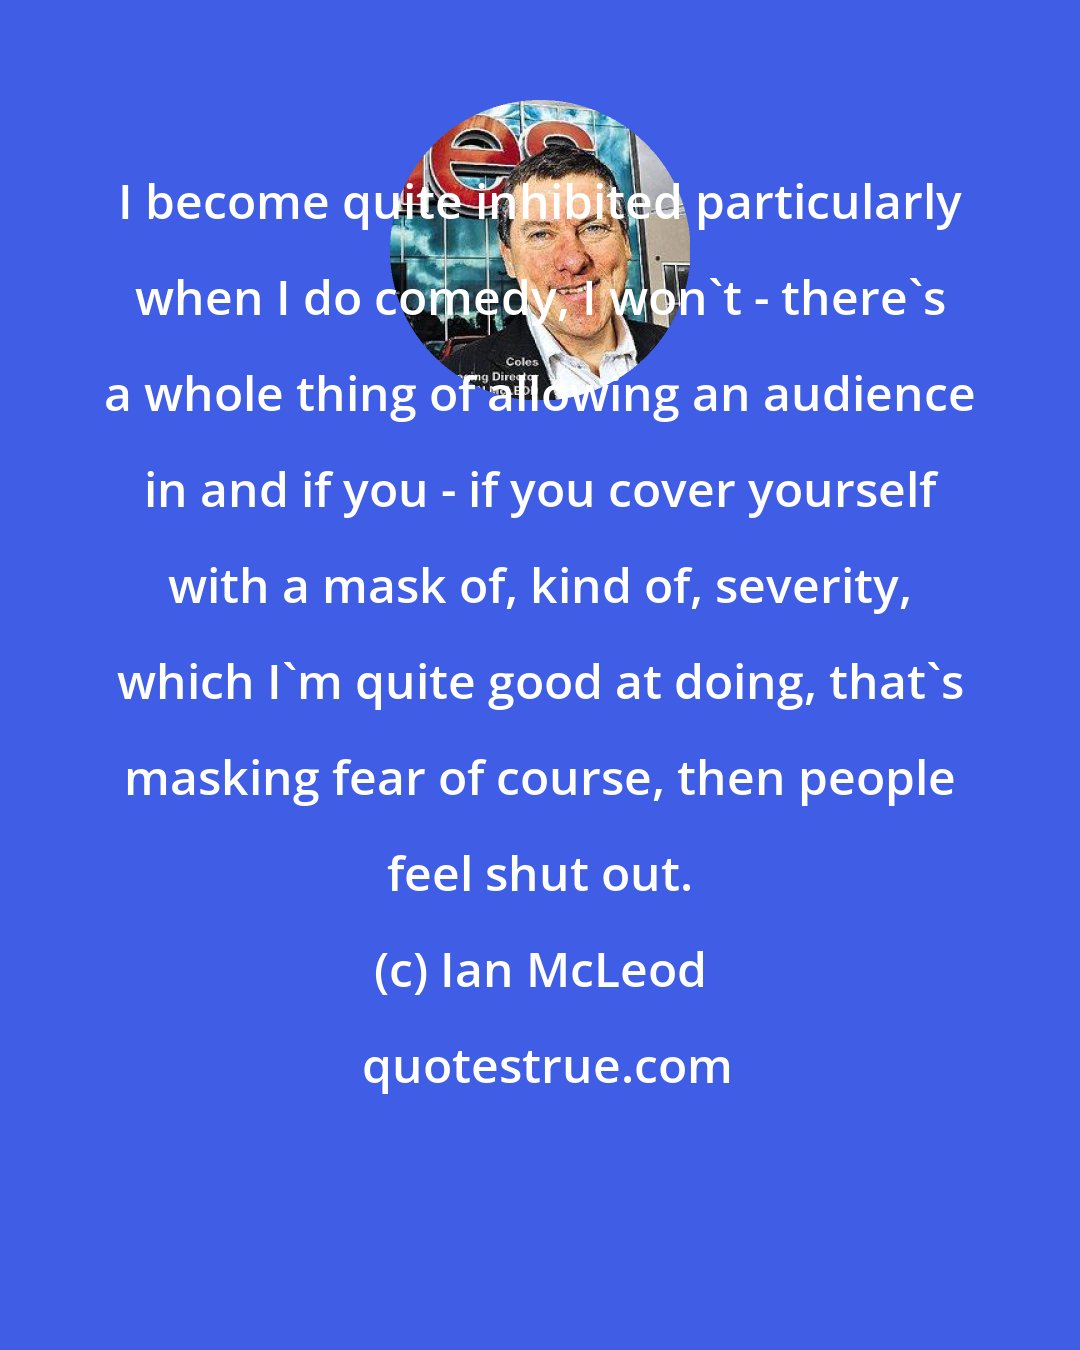 Ian McLeod: I become quite inhibited particularly when I do comedy, I won't - there's a whole thing of allowing an audience in and if you - if you cover yourself with a mask of, kind of, severity, which I'm quite good at doing, that's masking fear of course, then people feel shut out.